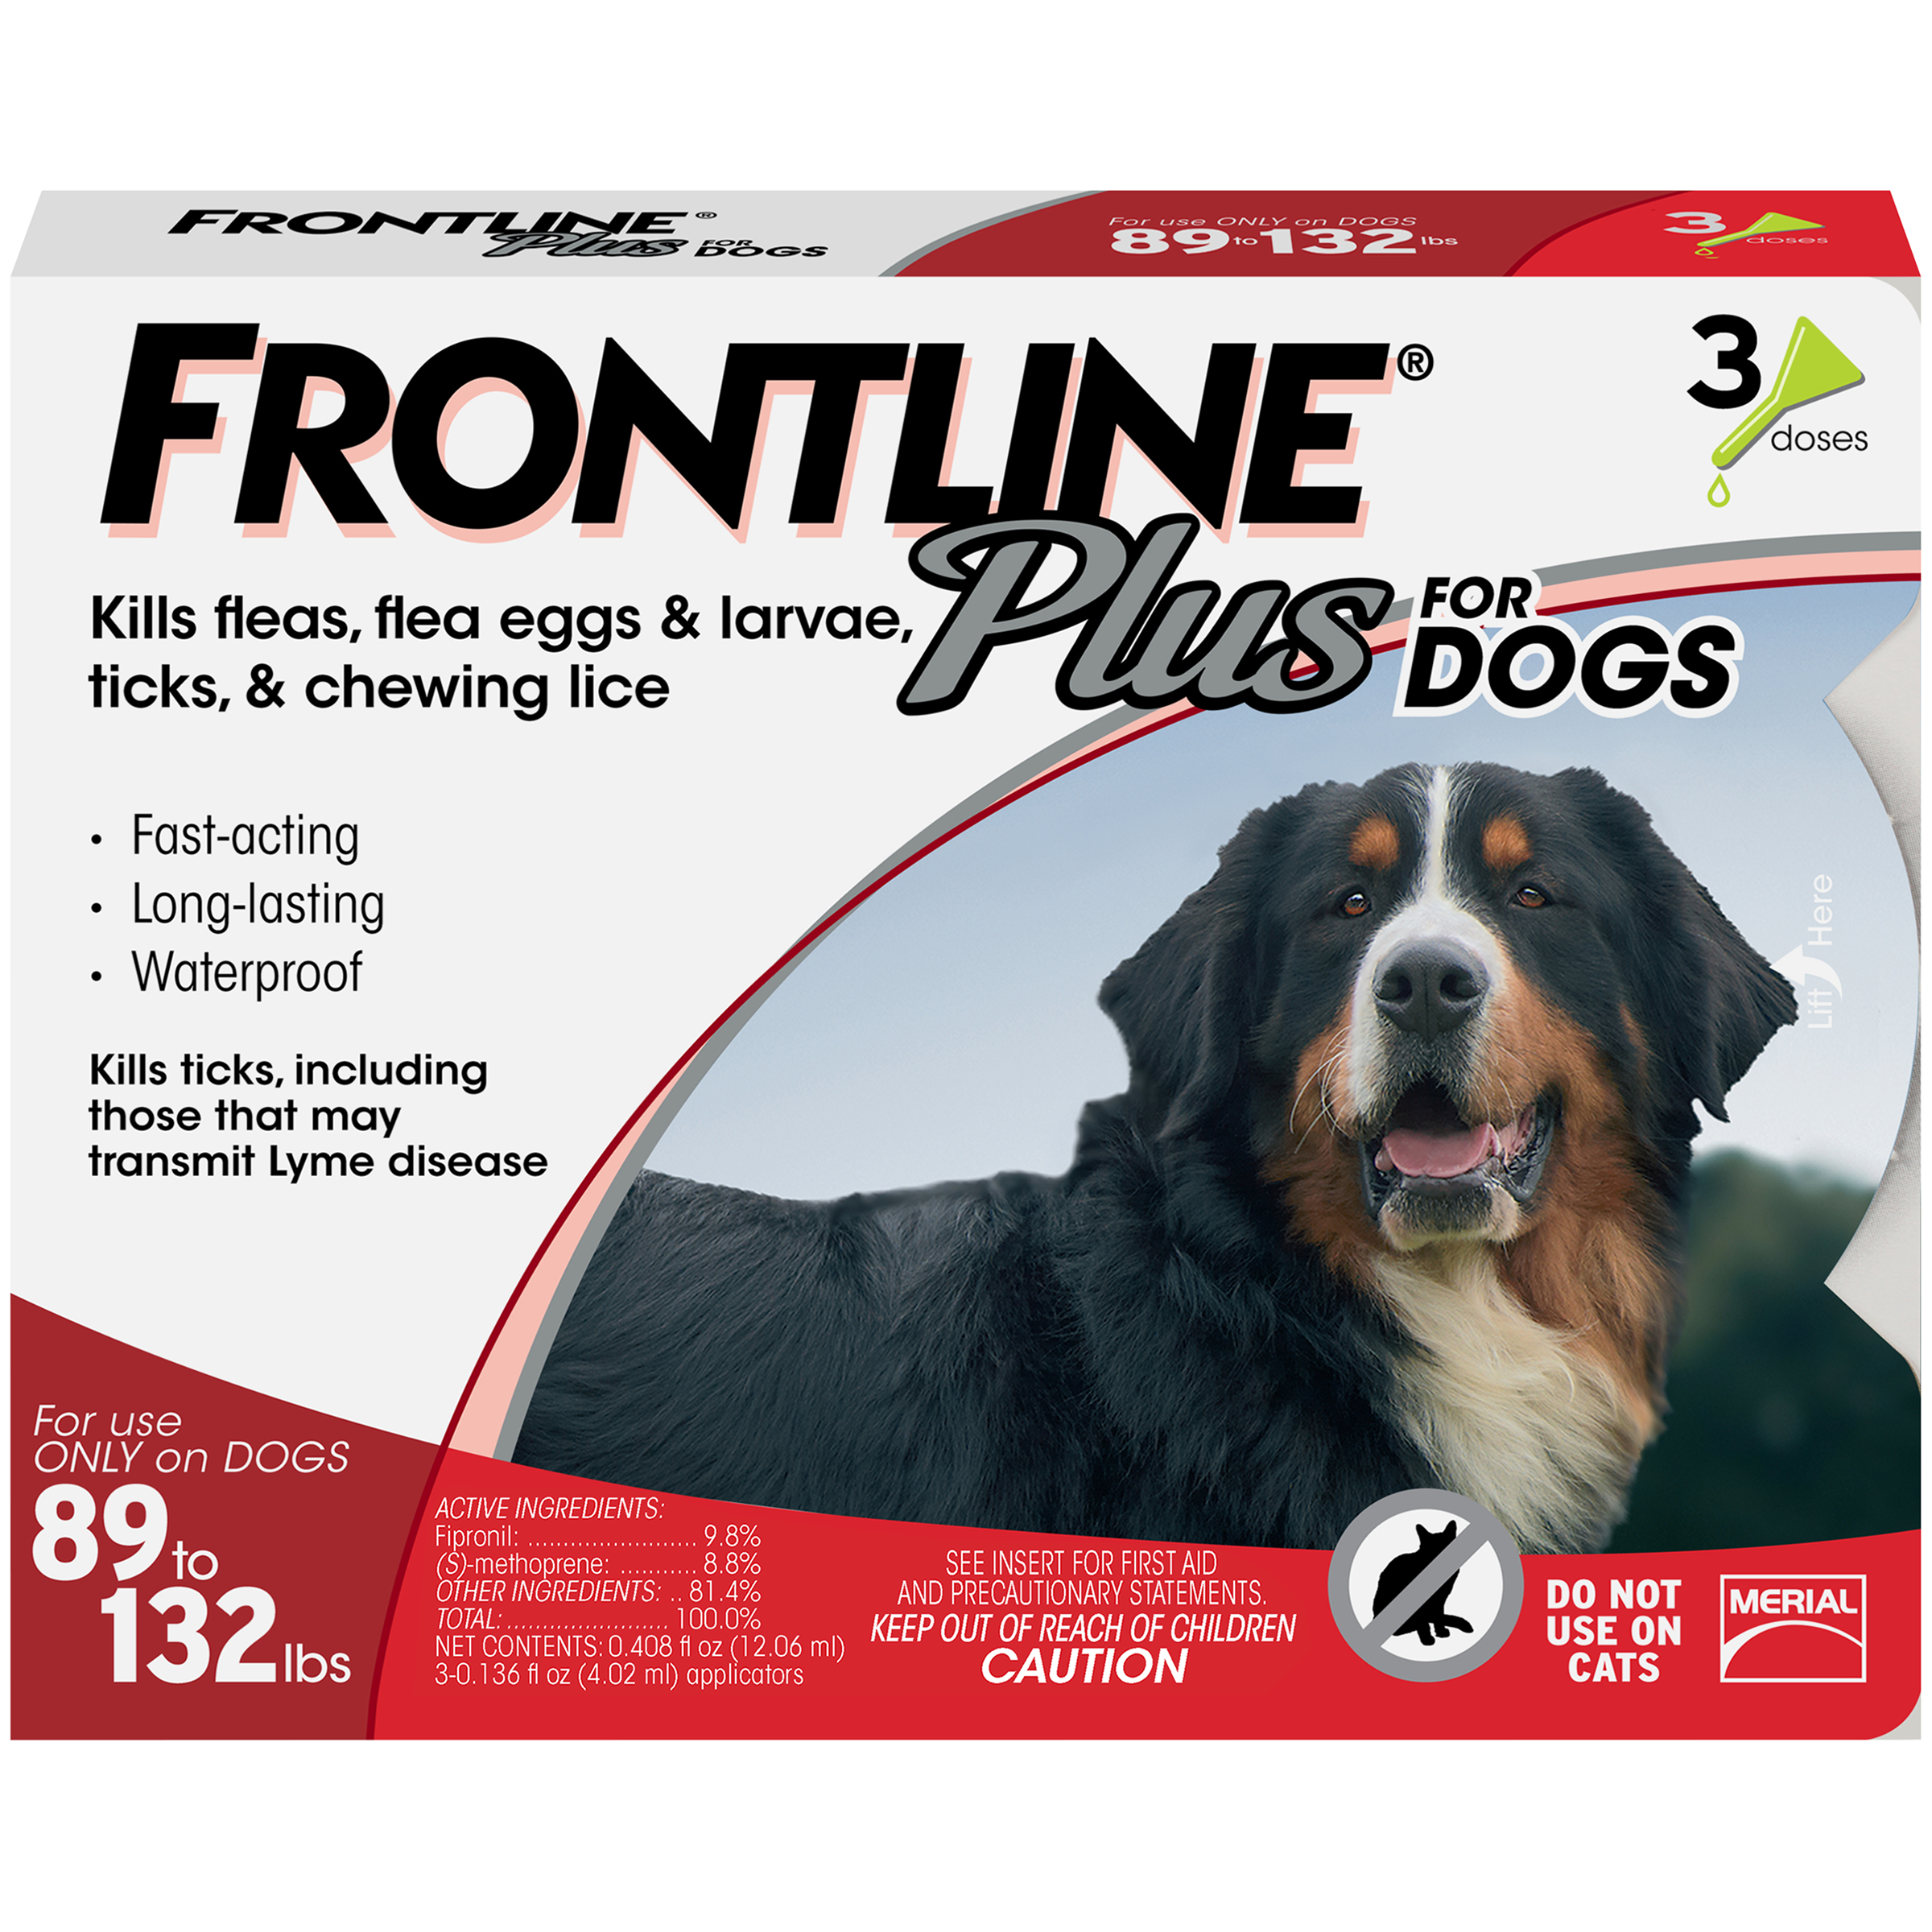 Frontline Plus for Dogs 89 to 132 lbs, 1 dose